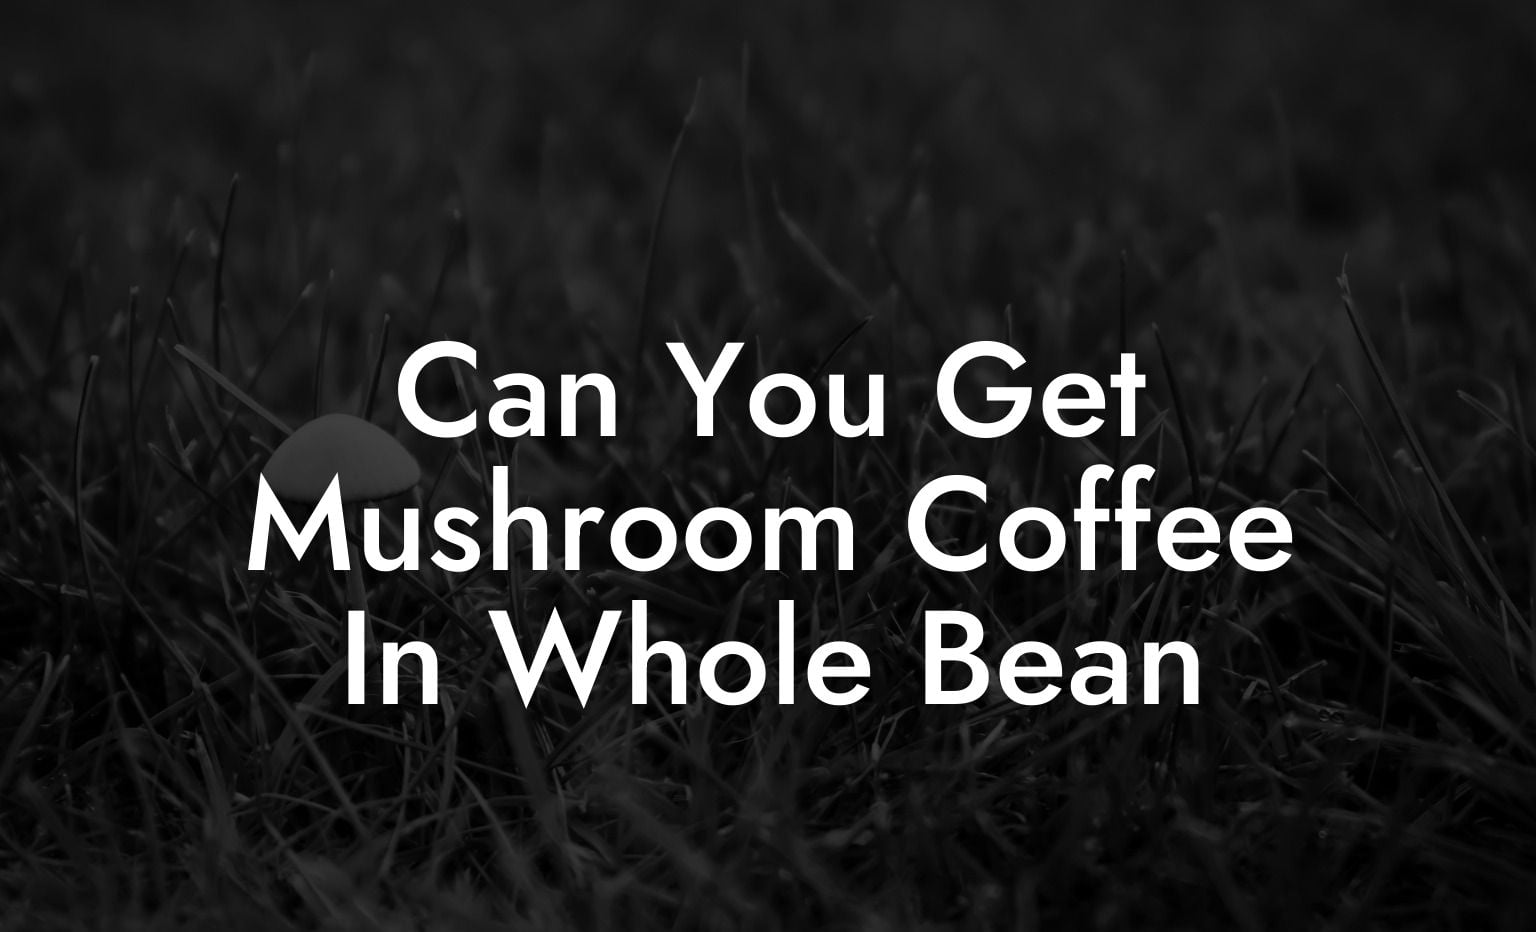 Can You Get Mushroom Coffee In Whole Bean